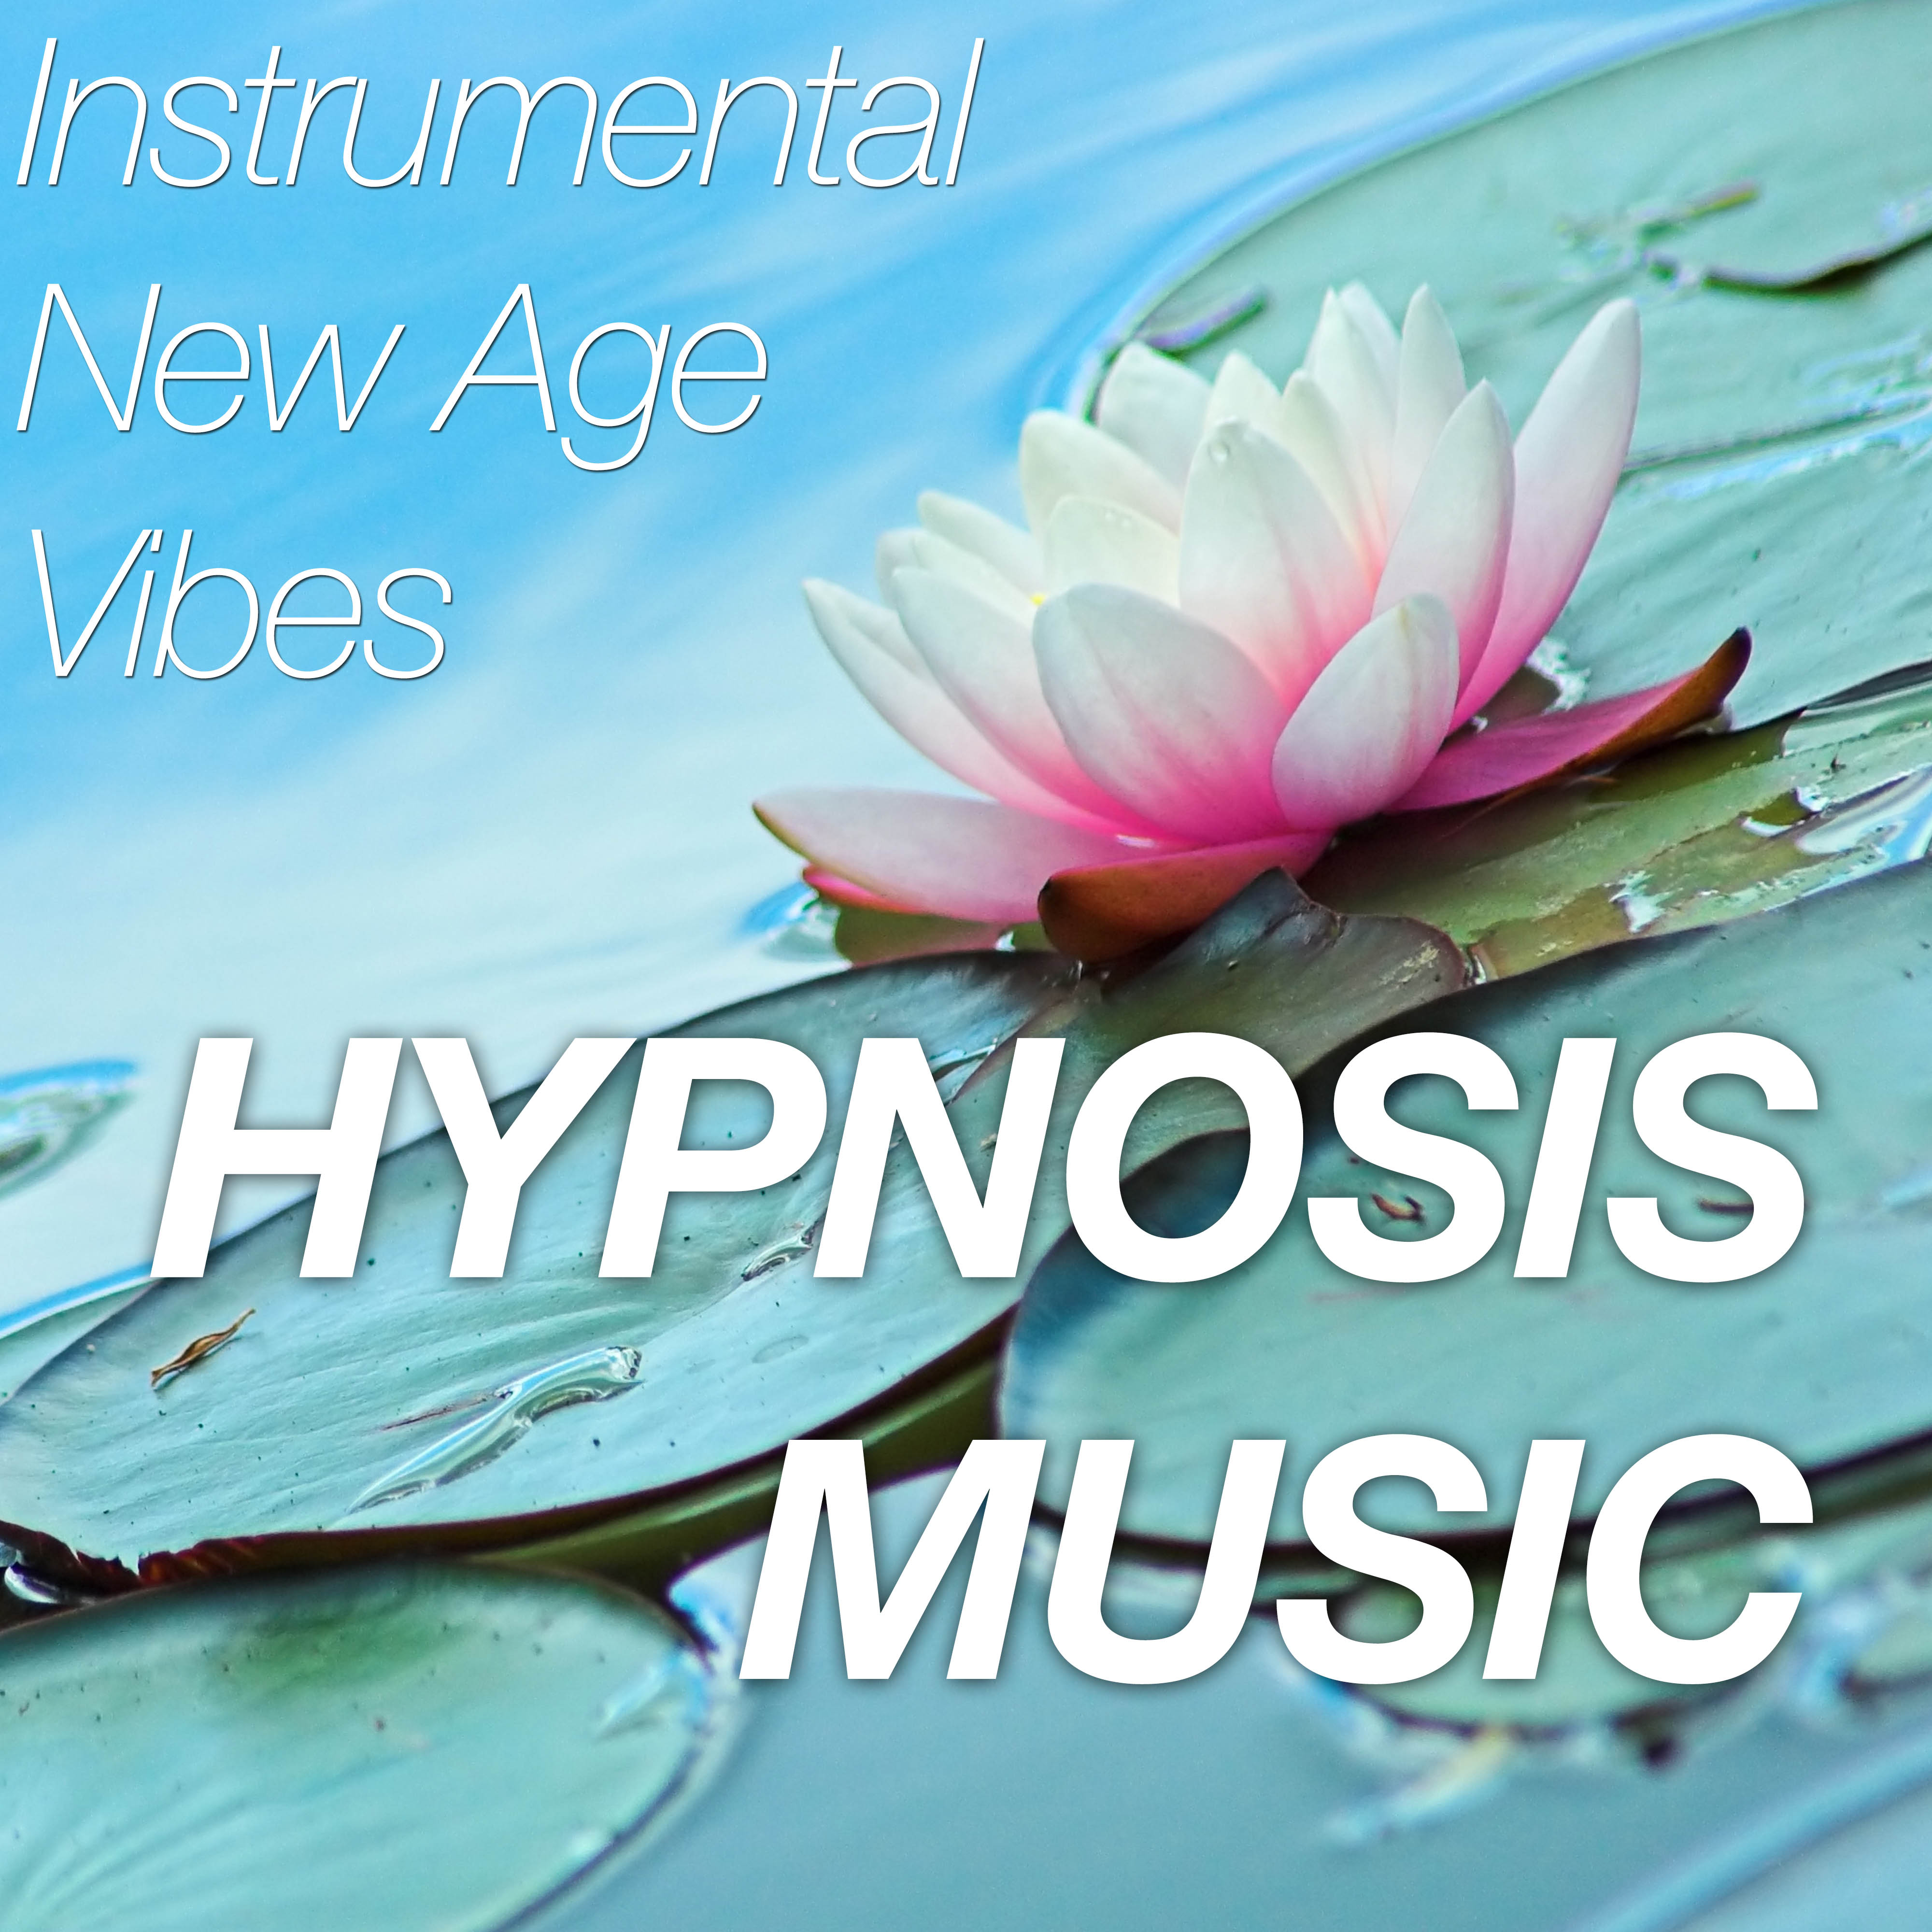 Hypnosis Music - Instrumental new Age Vibes for Daydreaming, Enlightenment and Wellness with Nature Sounds